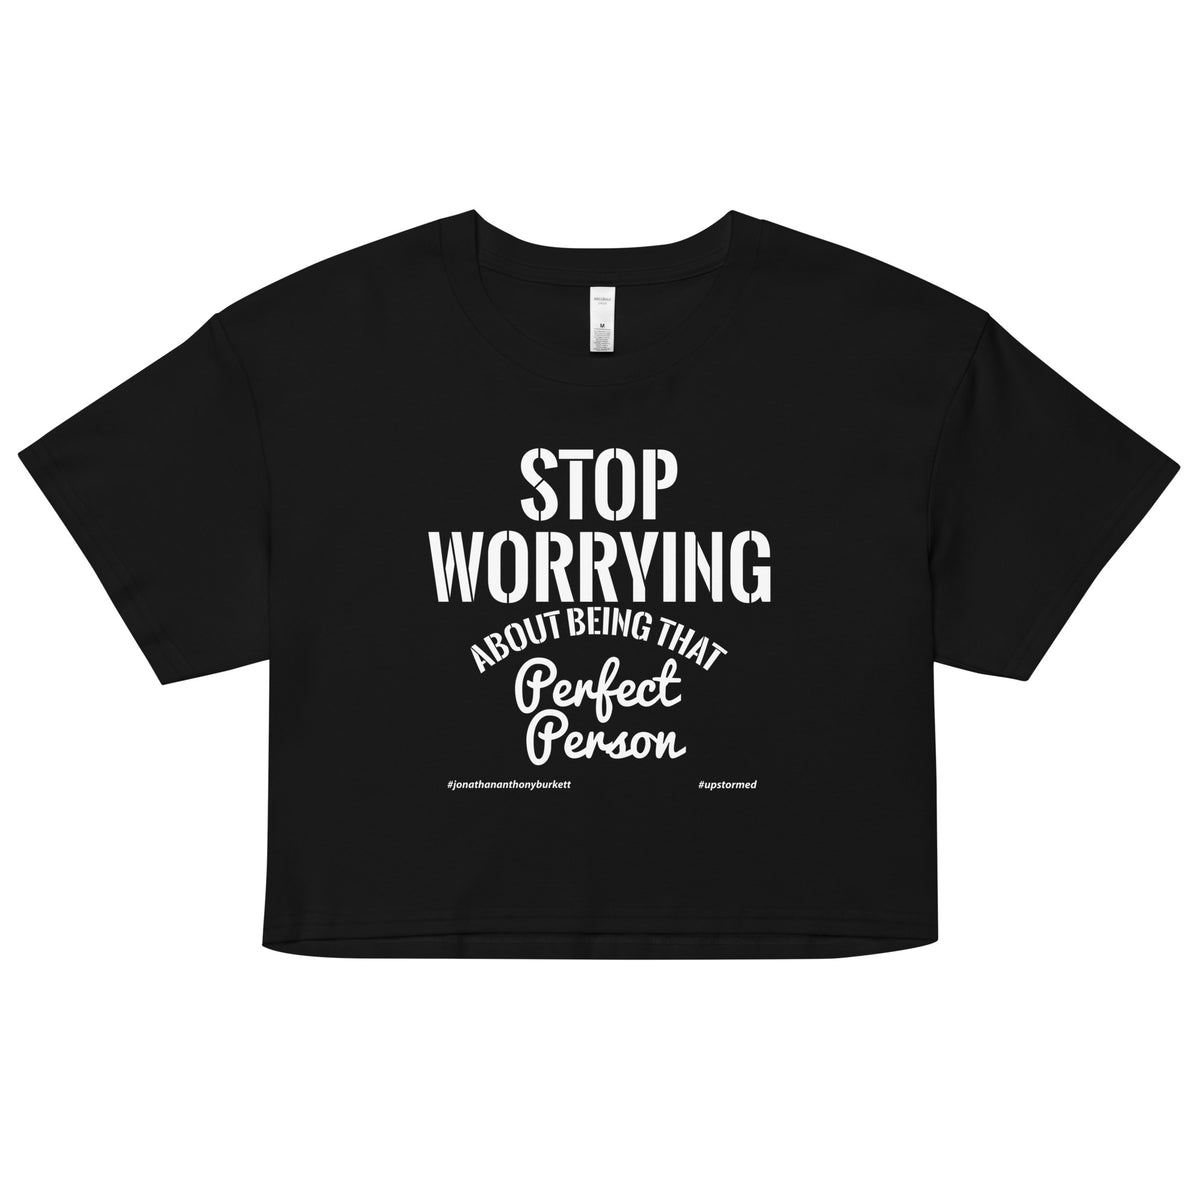 Stop Worrying About Being That Perfect Person Upstormed Women’s Crop Top